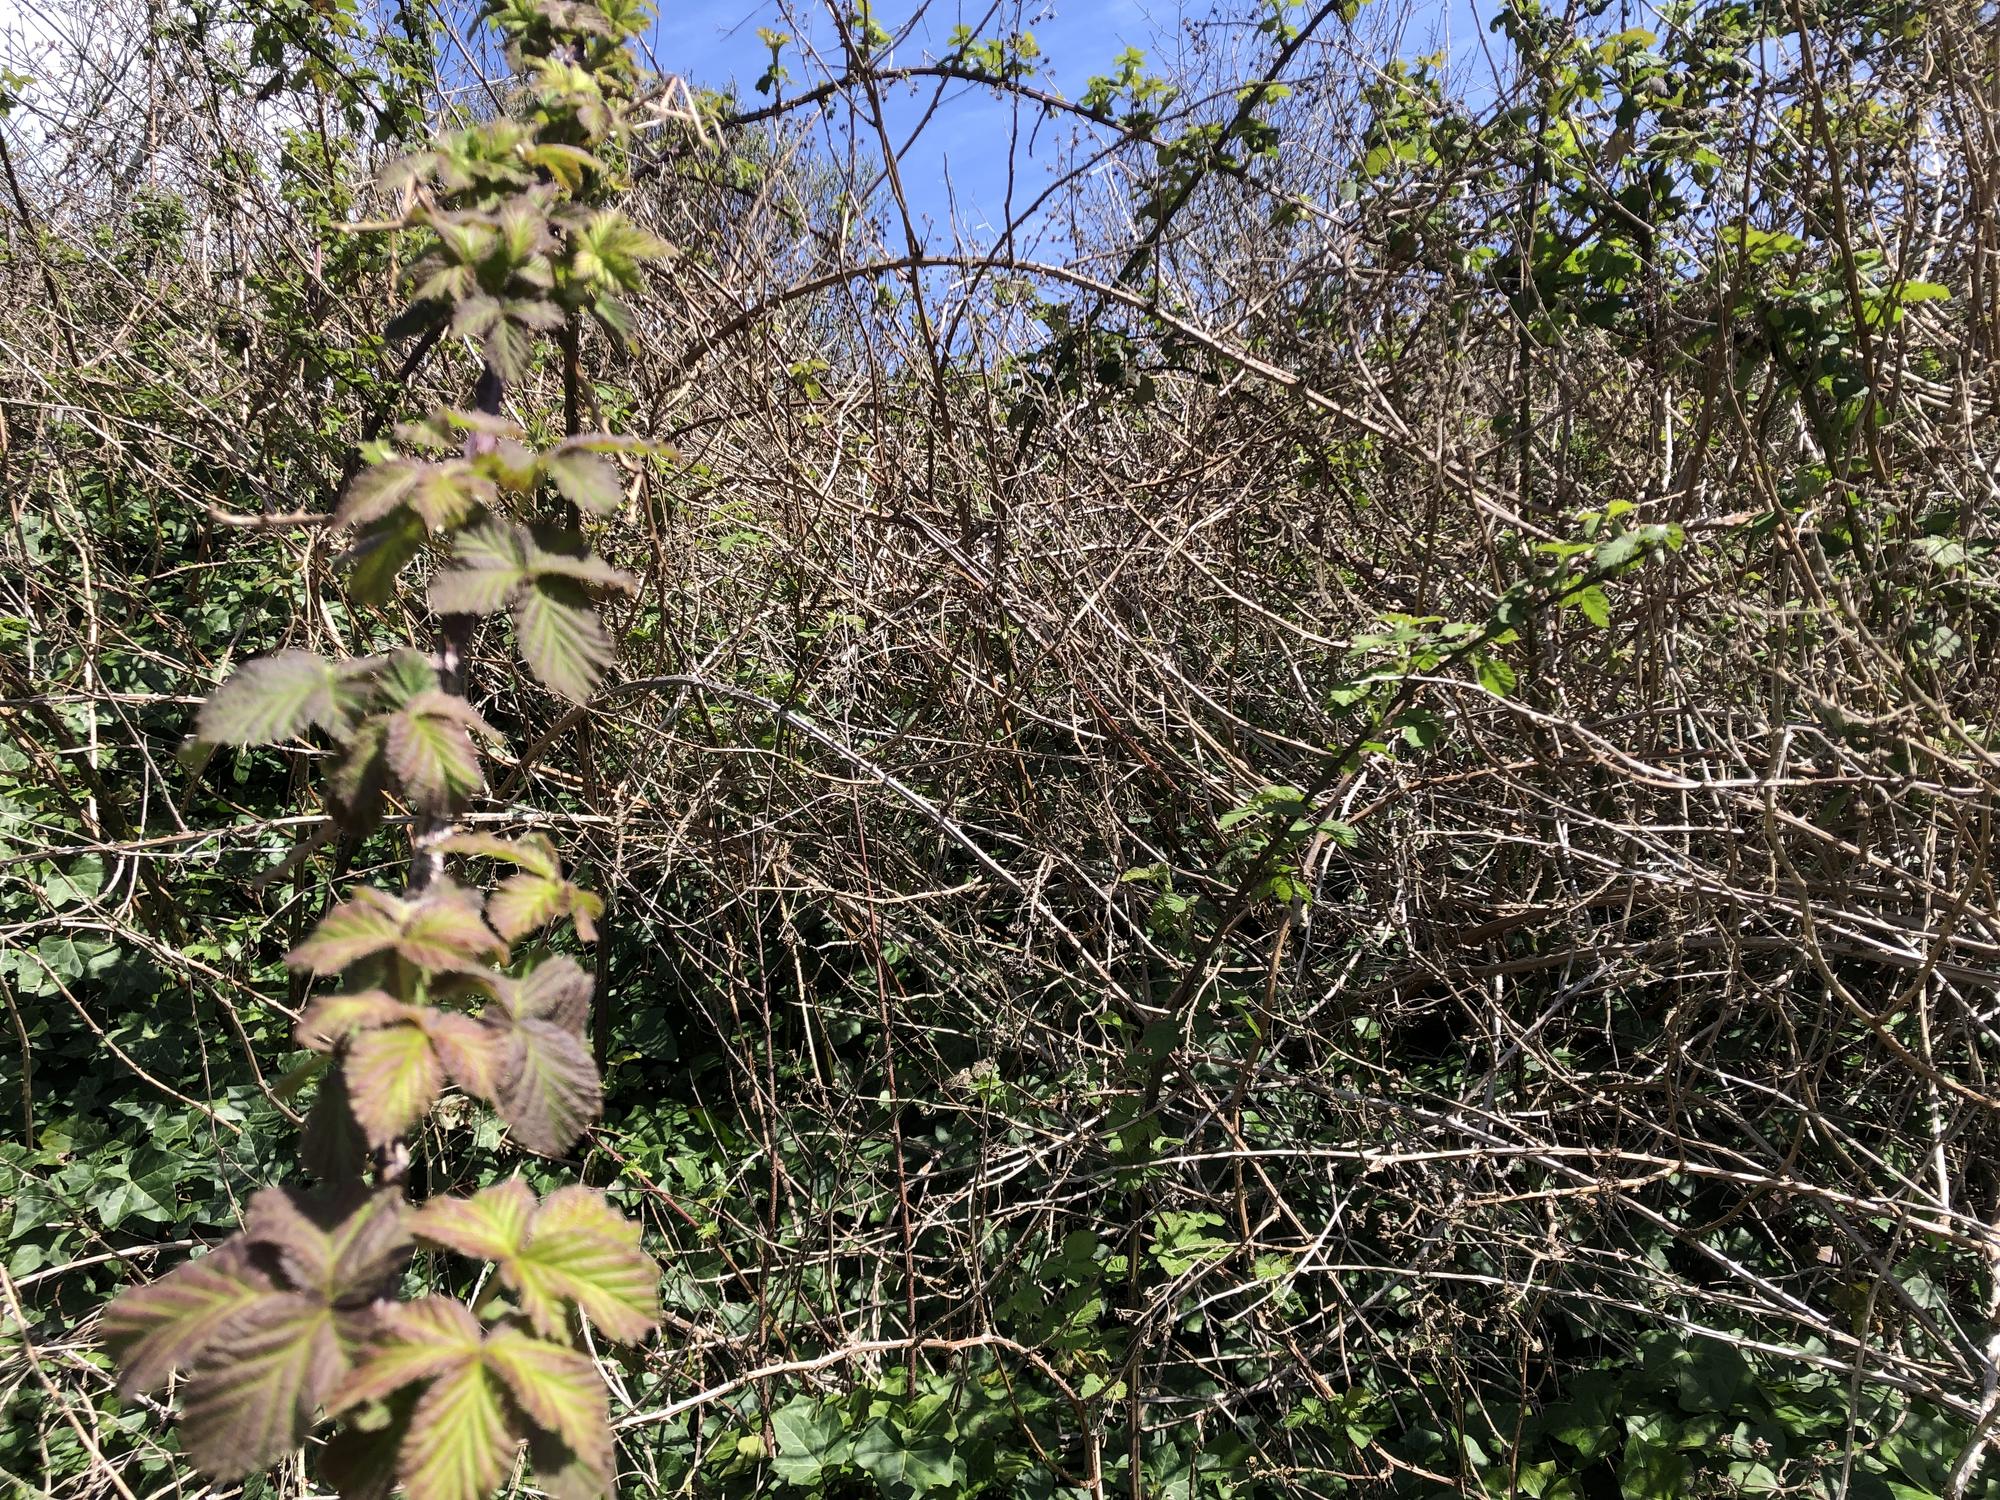 A blackberry bramble with shoots extending in several directions.